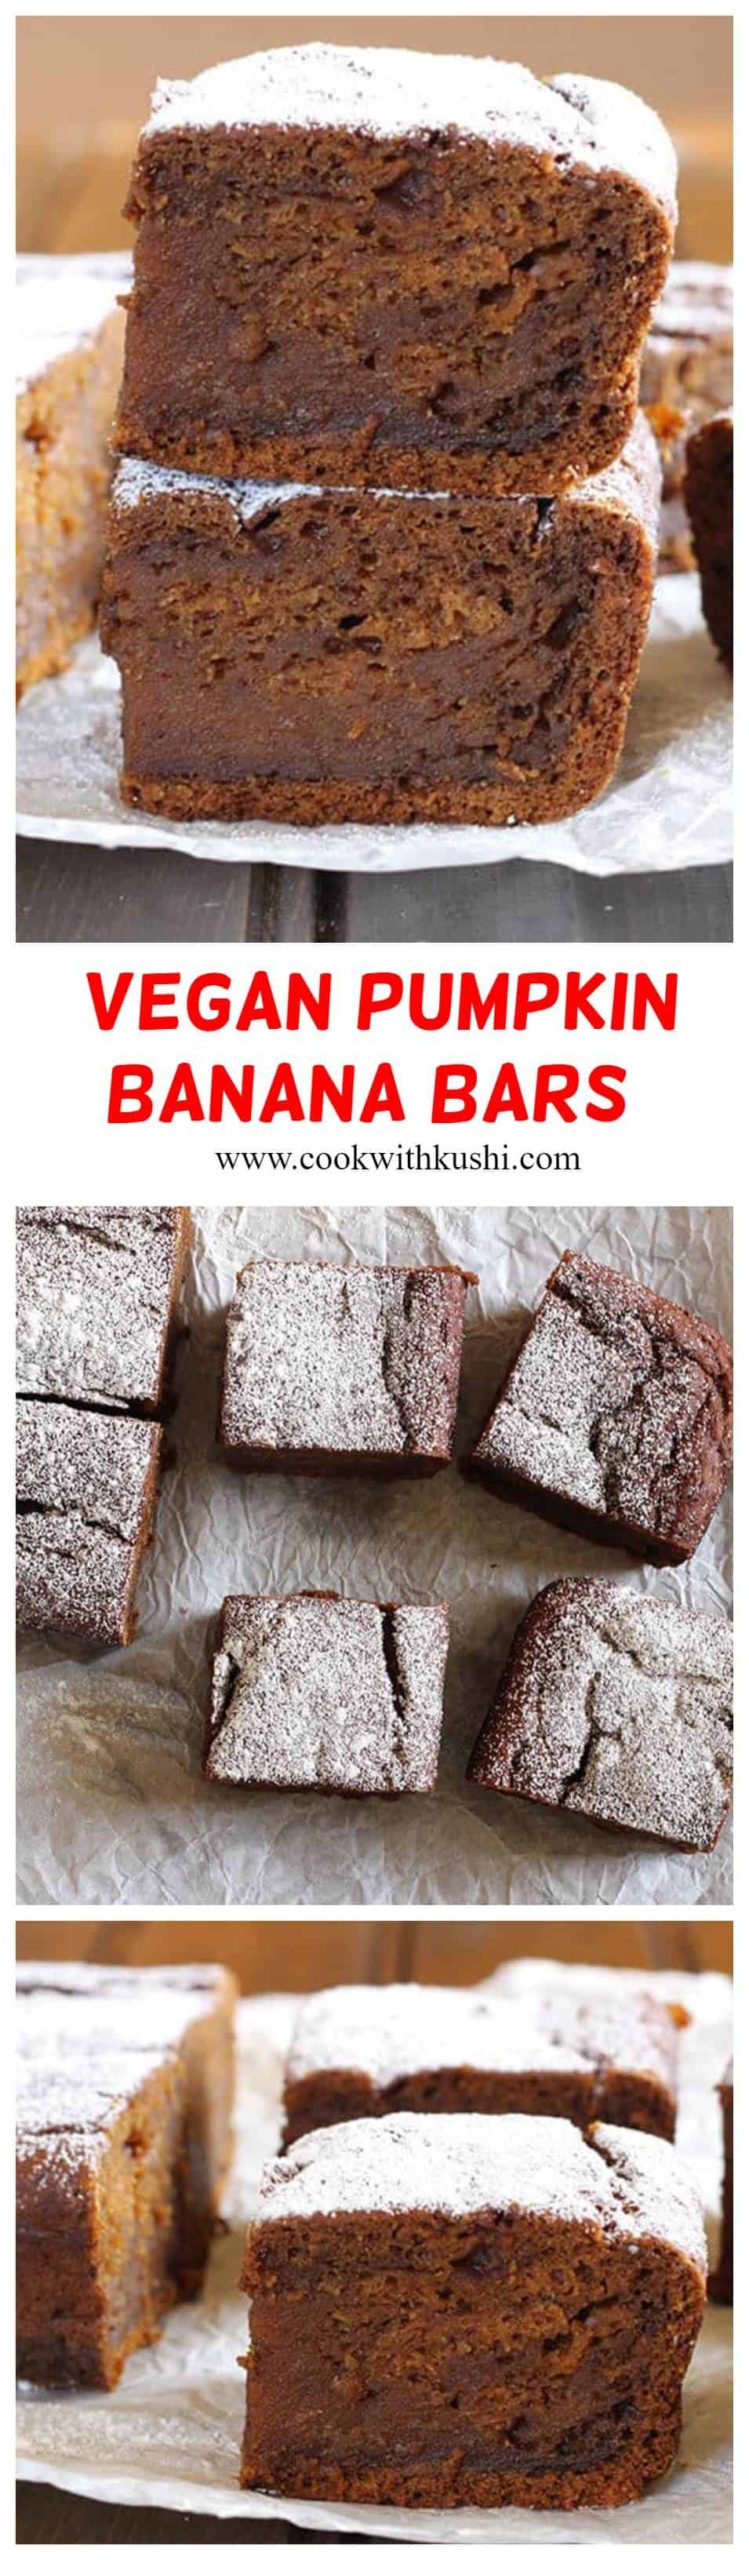 Vegan Pumpkin Banana Bars are easy to make, flavorful and delicious bars that are crispy at the edges and are moist and chewy inside. A perfect fall and winter dessert recipe to try with pumpkin #pumpkinrecipes #fallfood #winterrecipes #christmasdesserts #thanksgivingdessert #pumpkinpuree